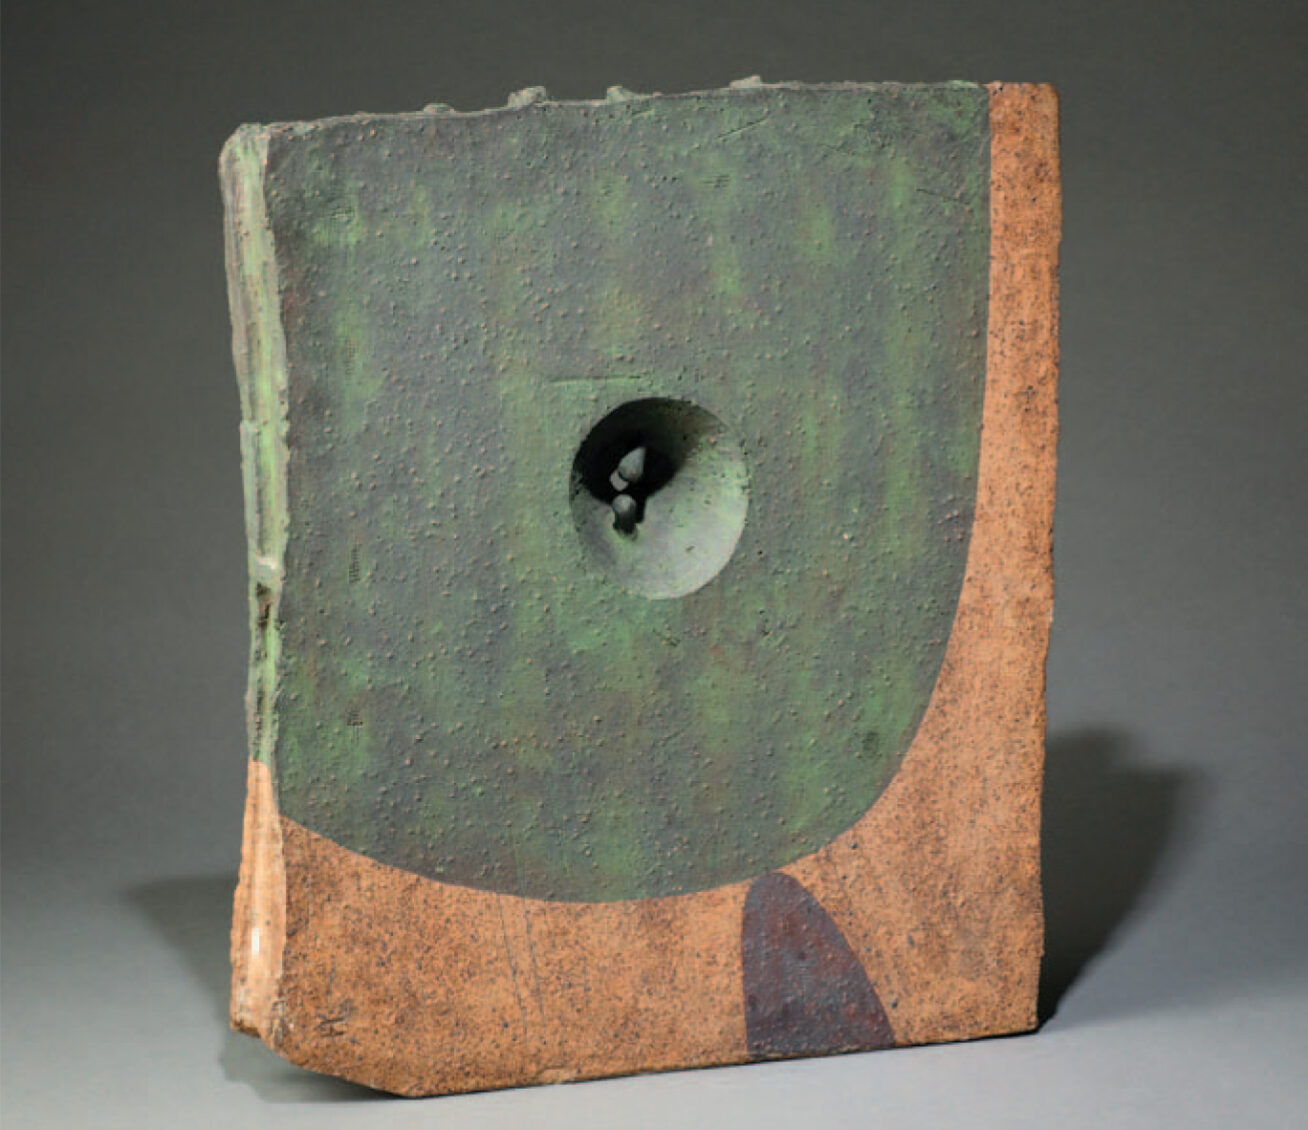 Photograph of a Japanese ceramic sculpture with a green glaze